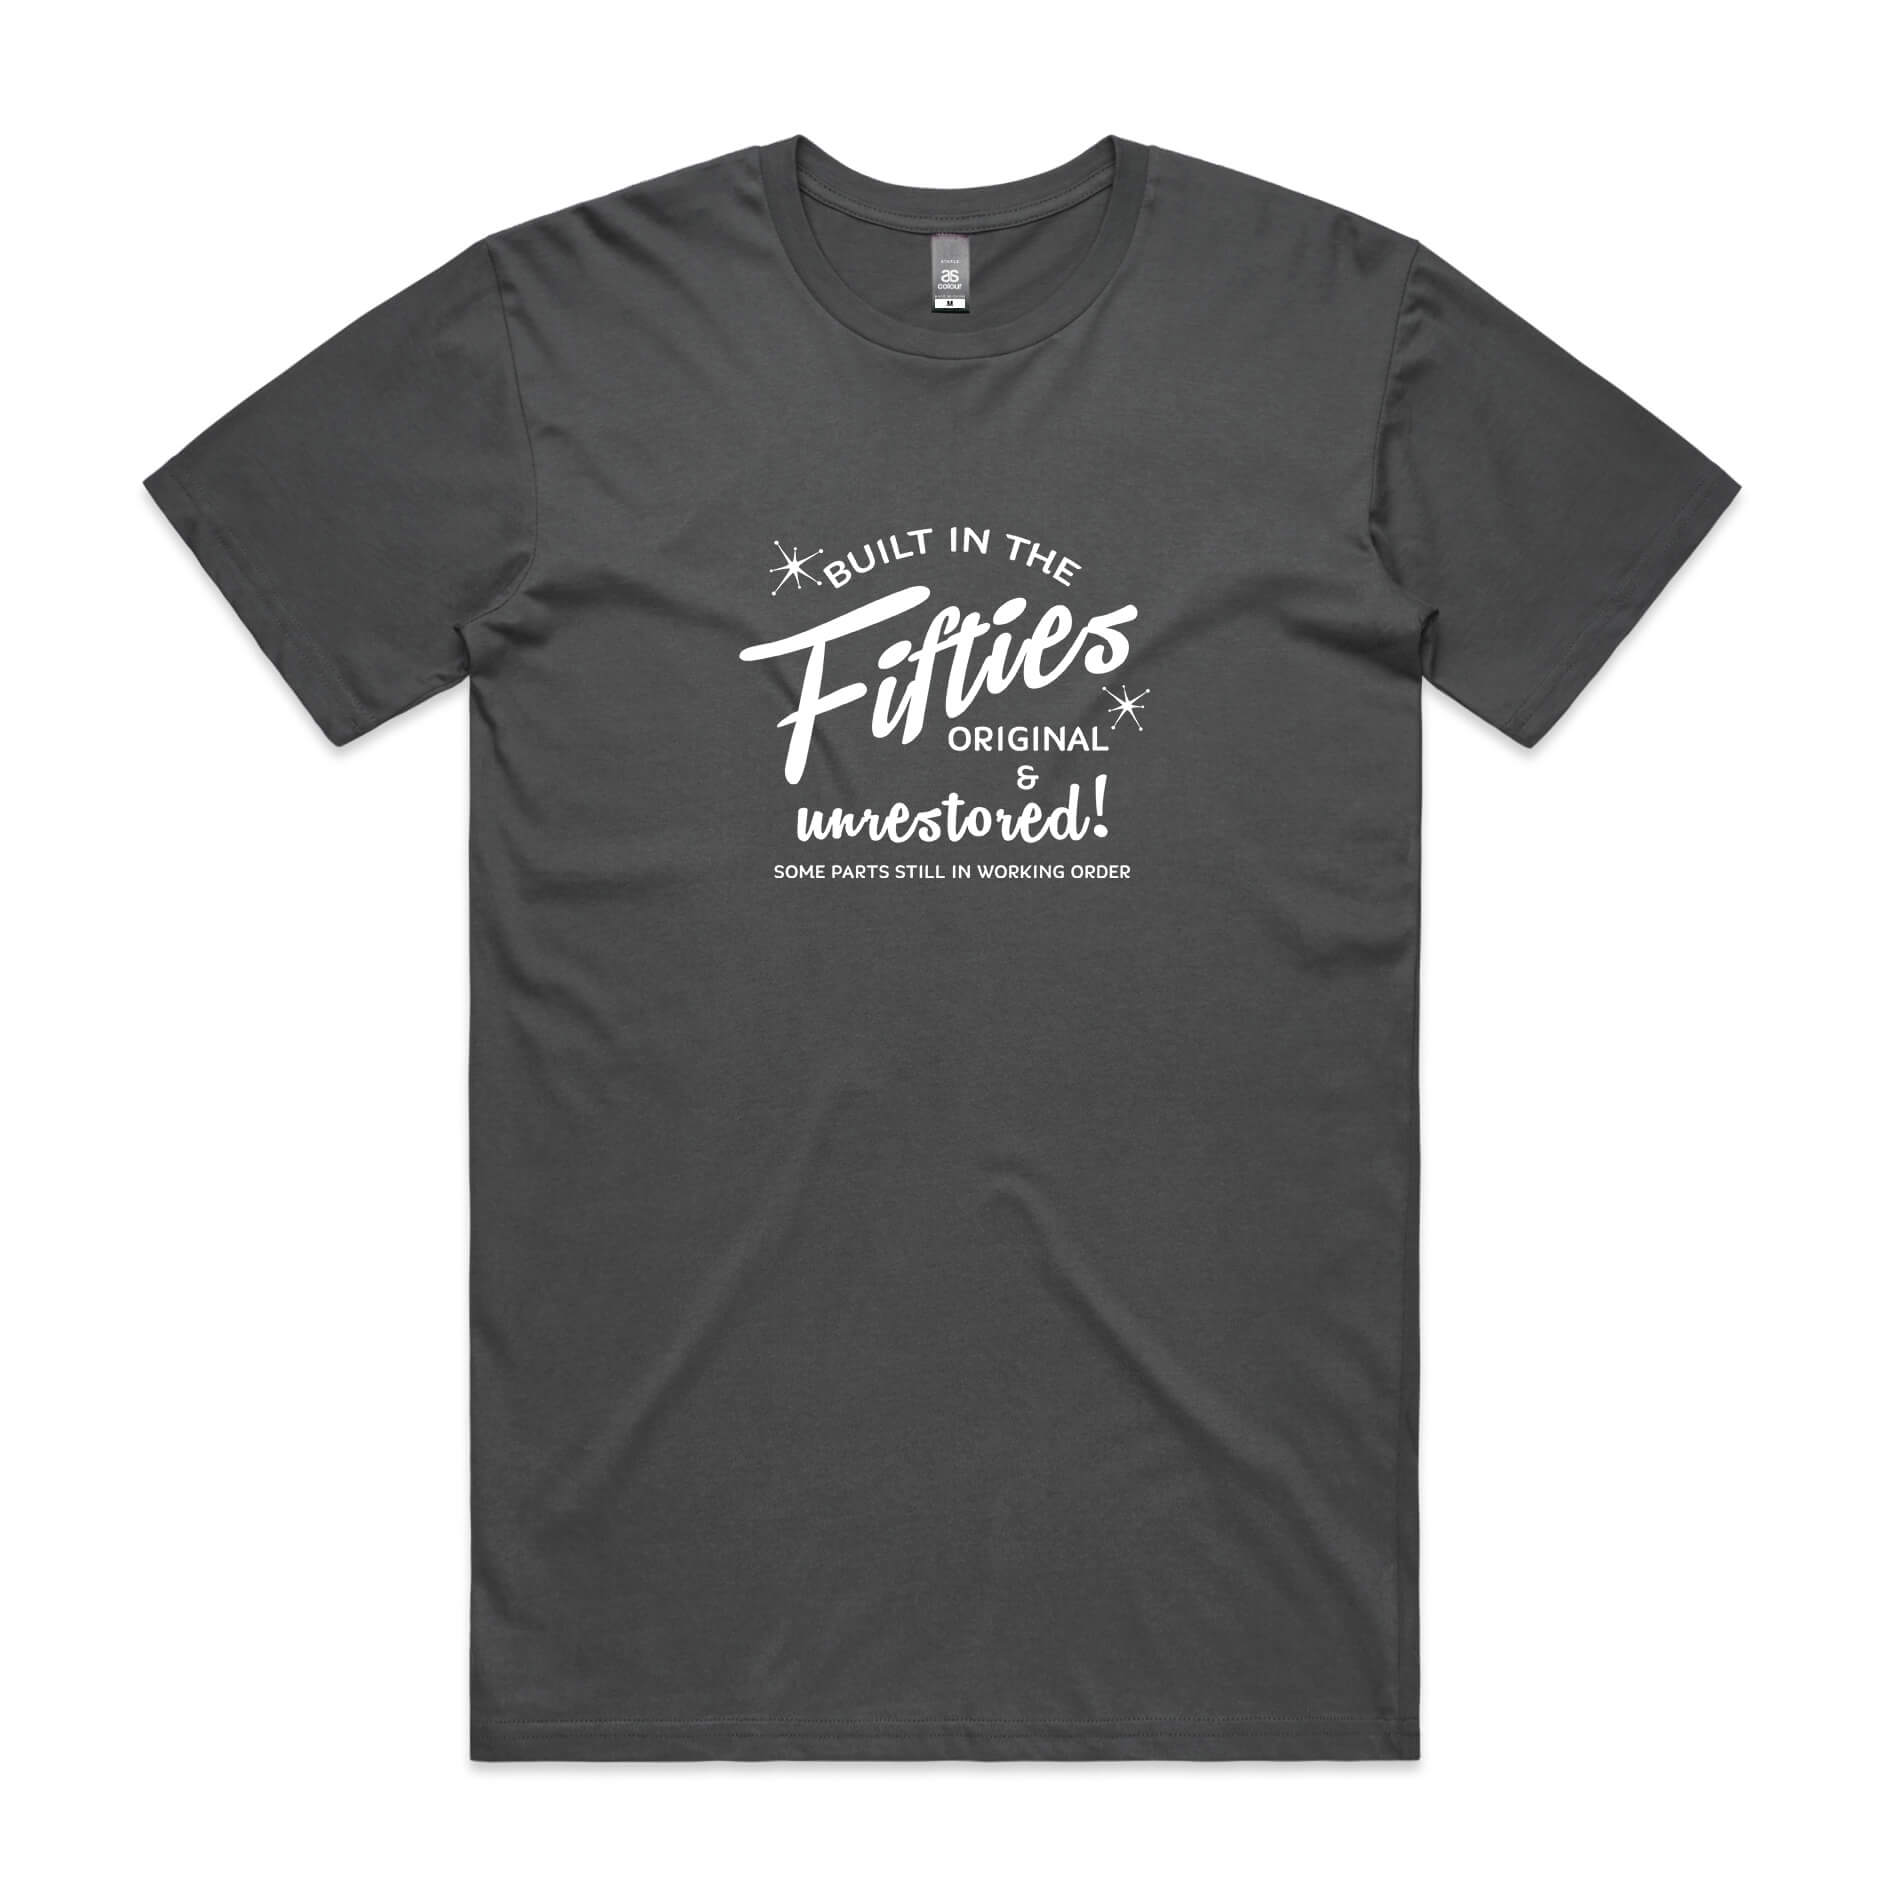 Built in the Fifties t-shirt in charcoal grey with white slogan print